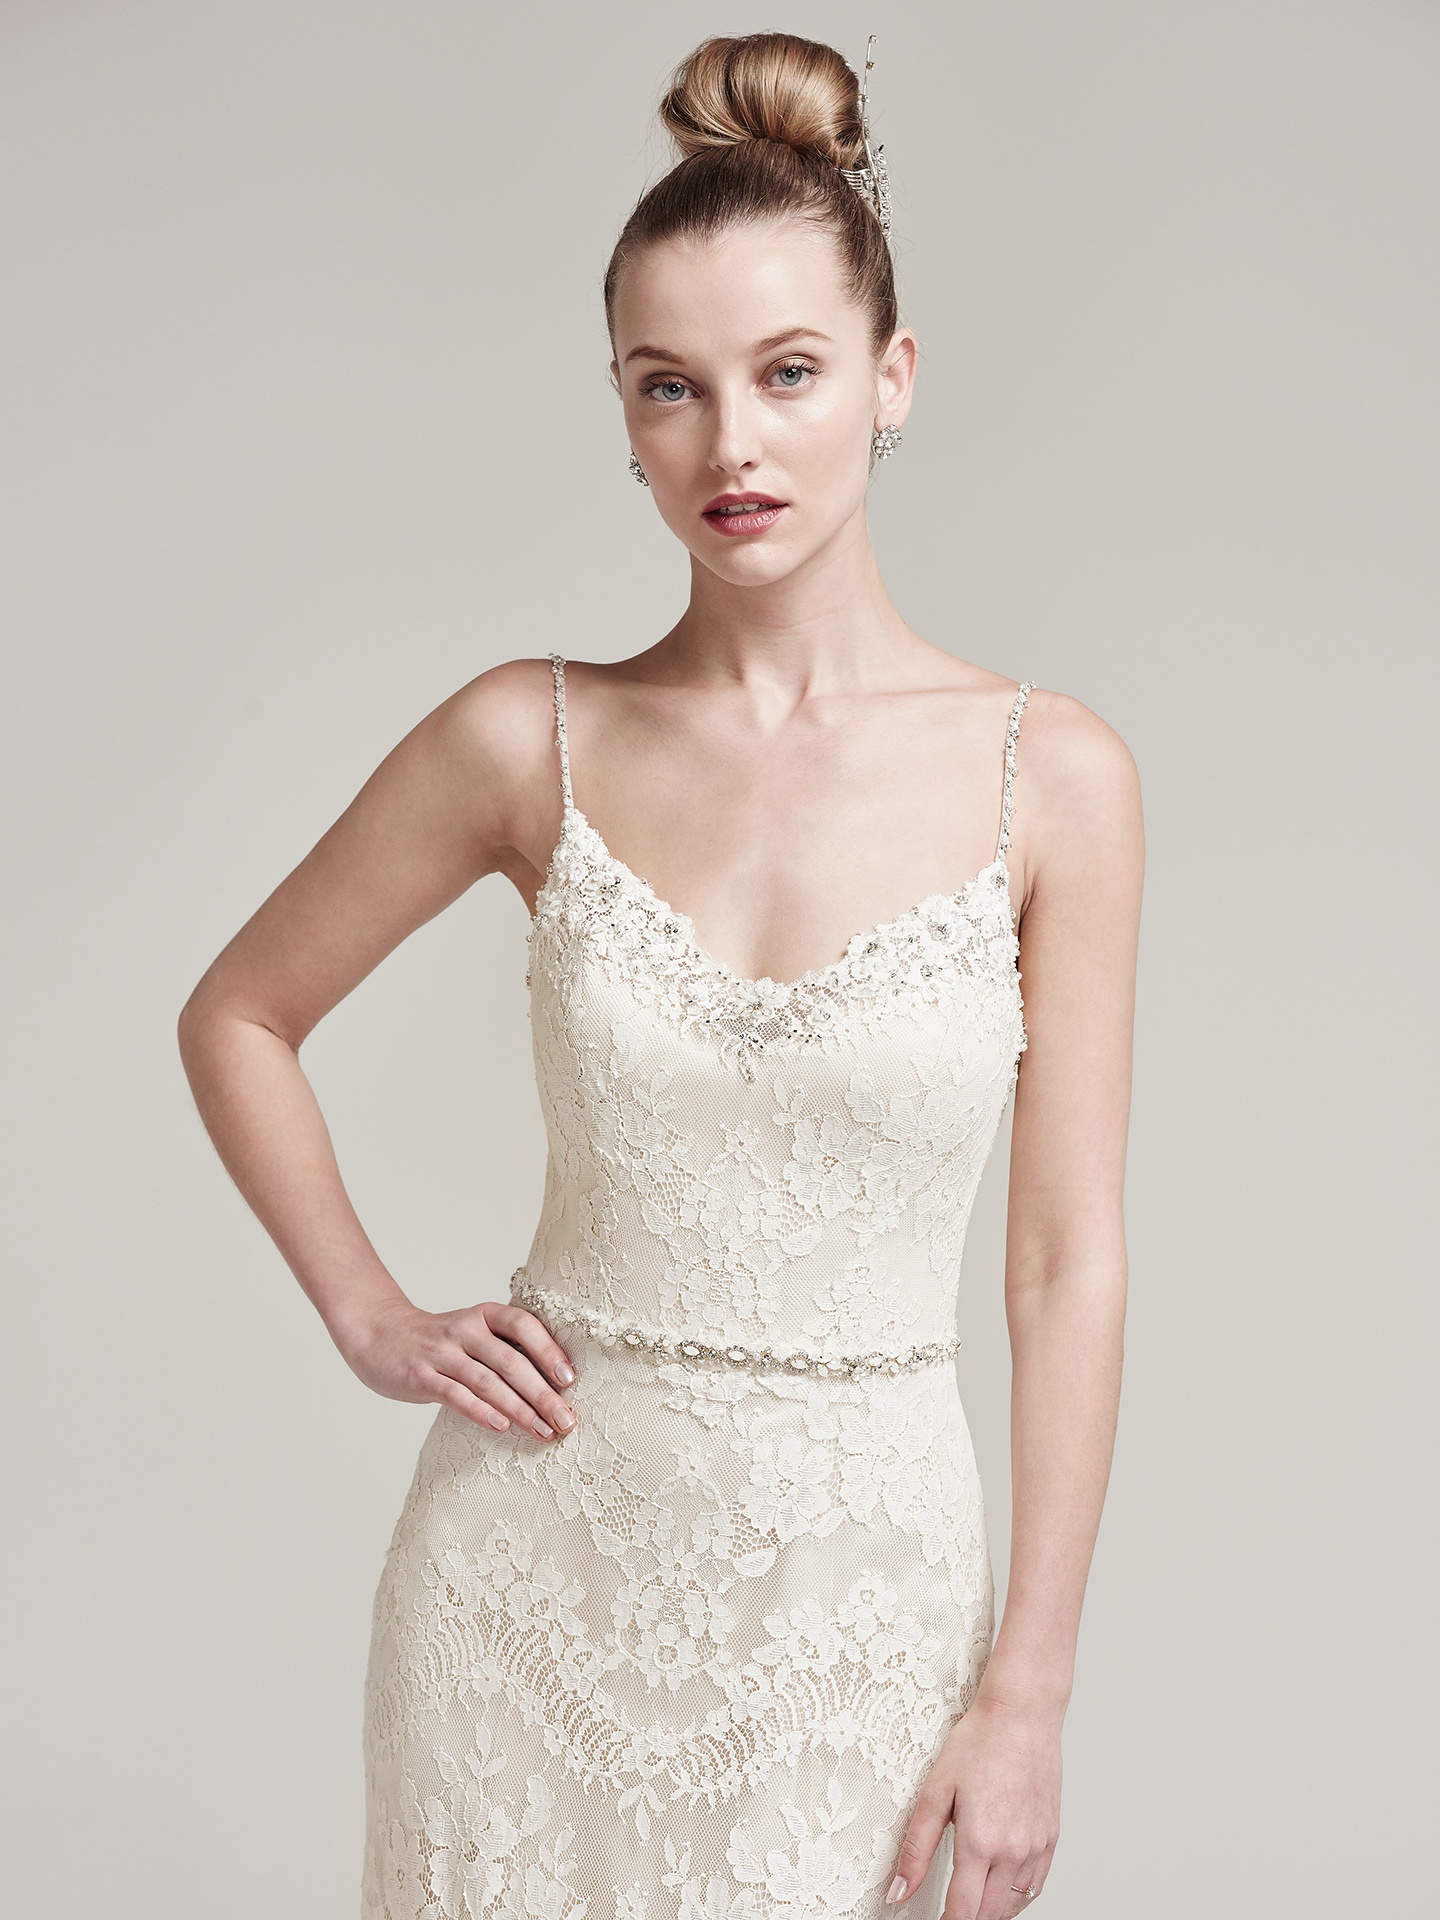 Ester by Sottero and Midgley: Wedding Dress with Chic Spaghetti Straps